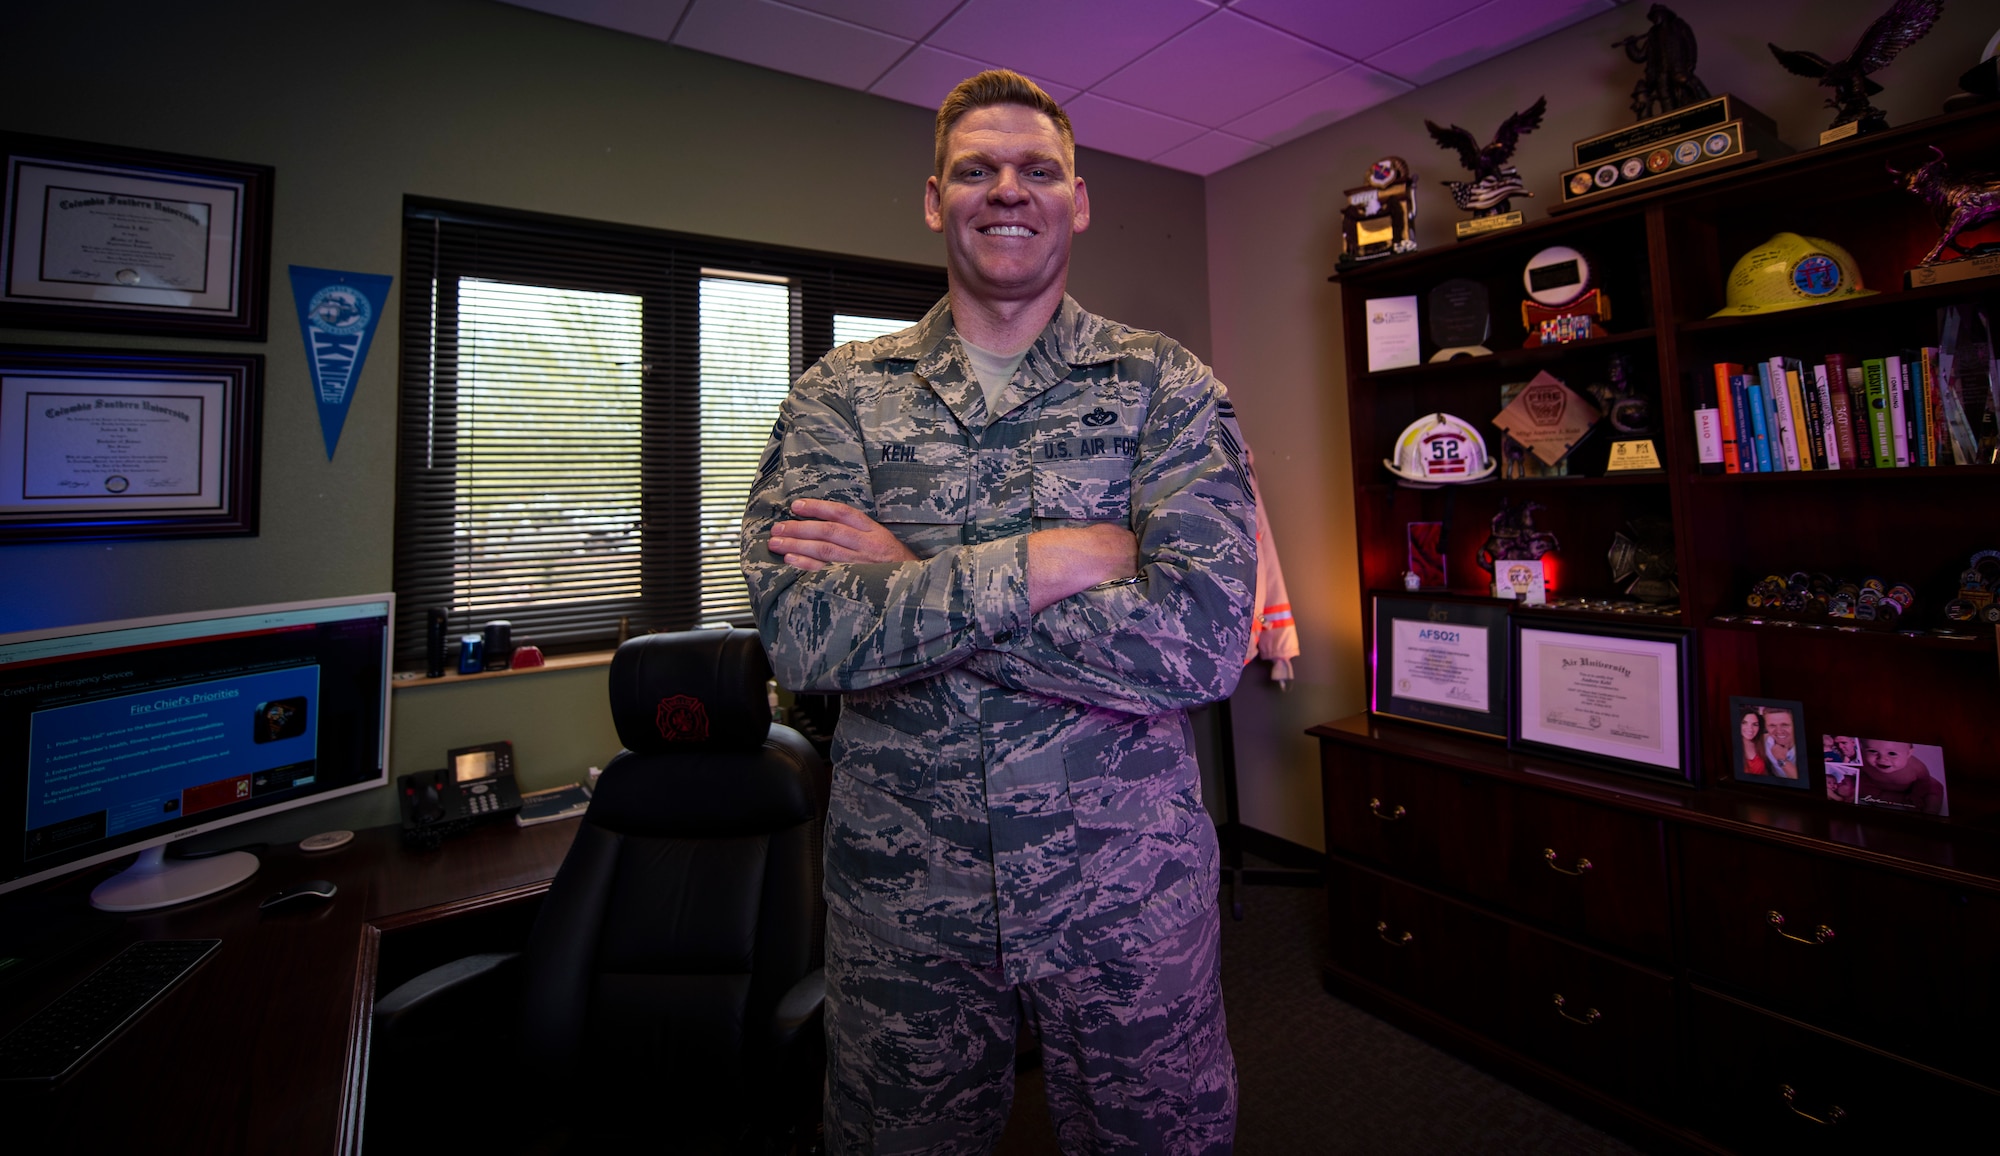 An Airman stands in the middle of his office and smiles for a photo.